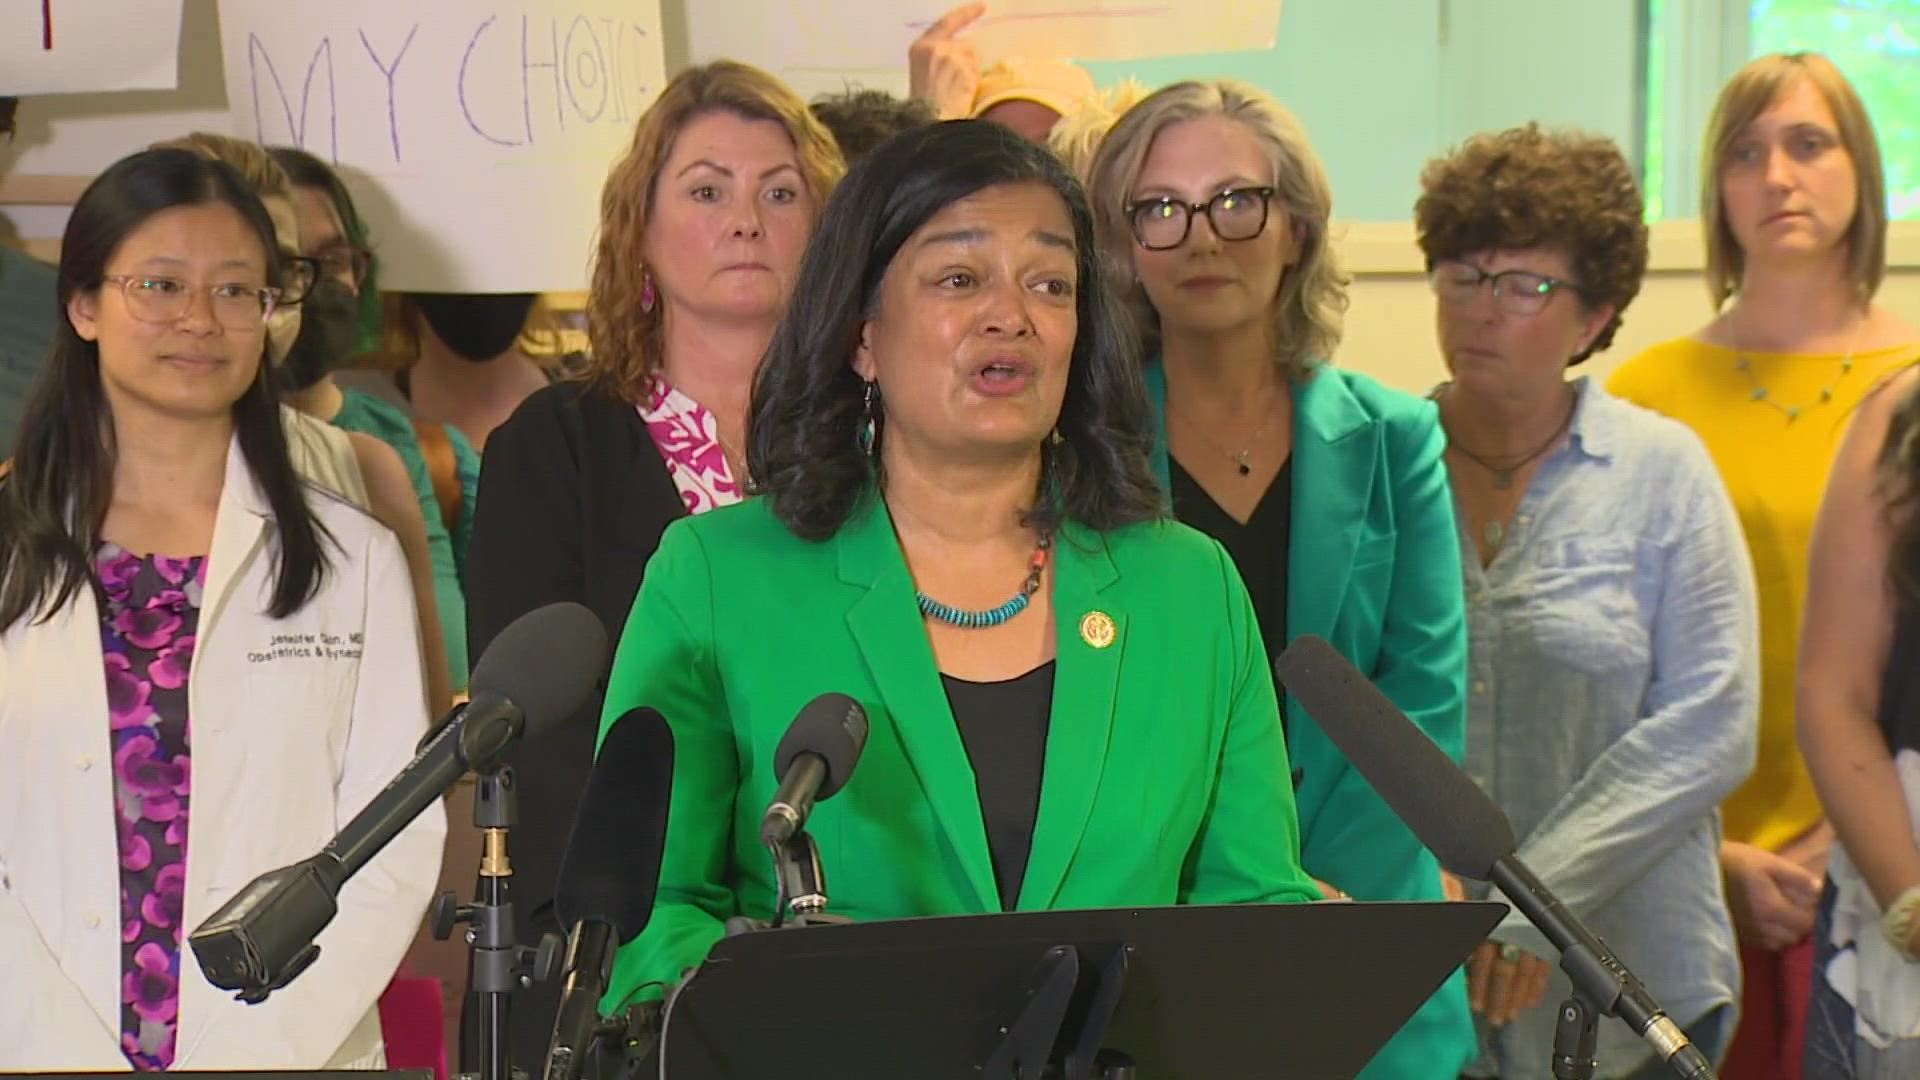 At the same press conference, Congresswoman Pramila Jayapal suggested it was time for a women's strike in the United States.